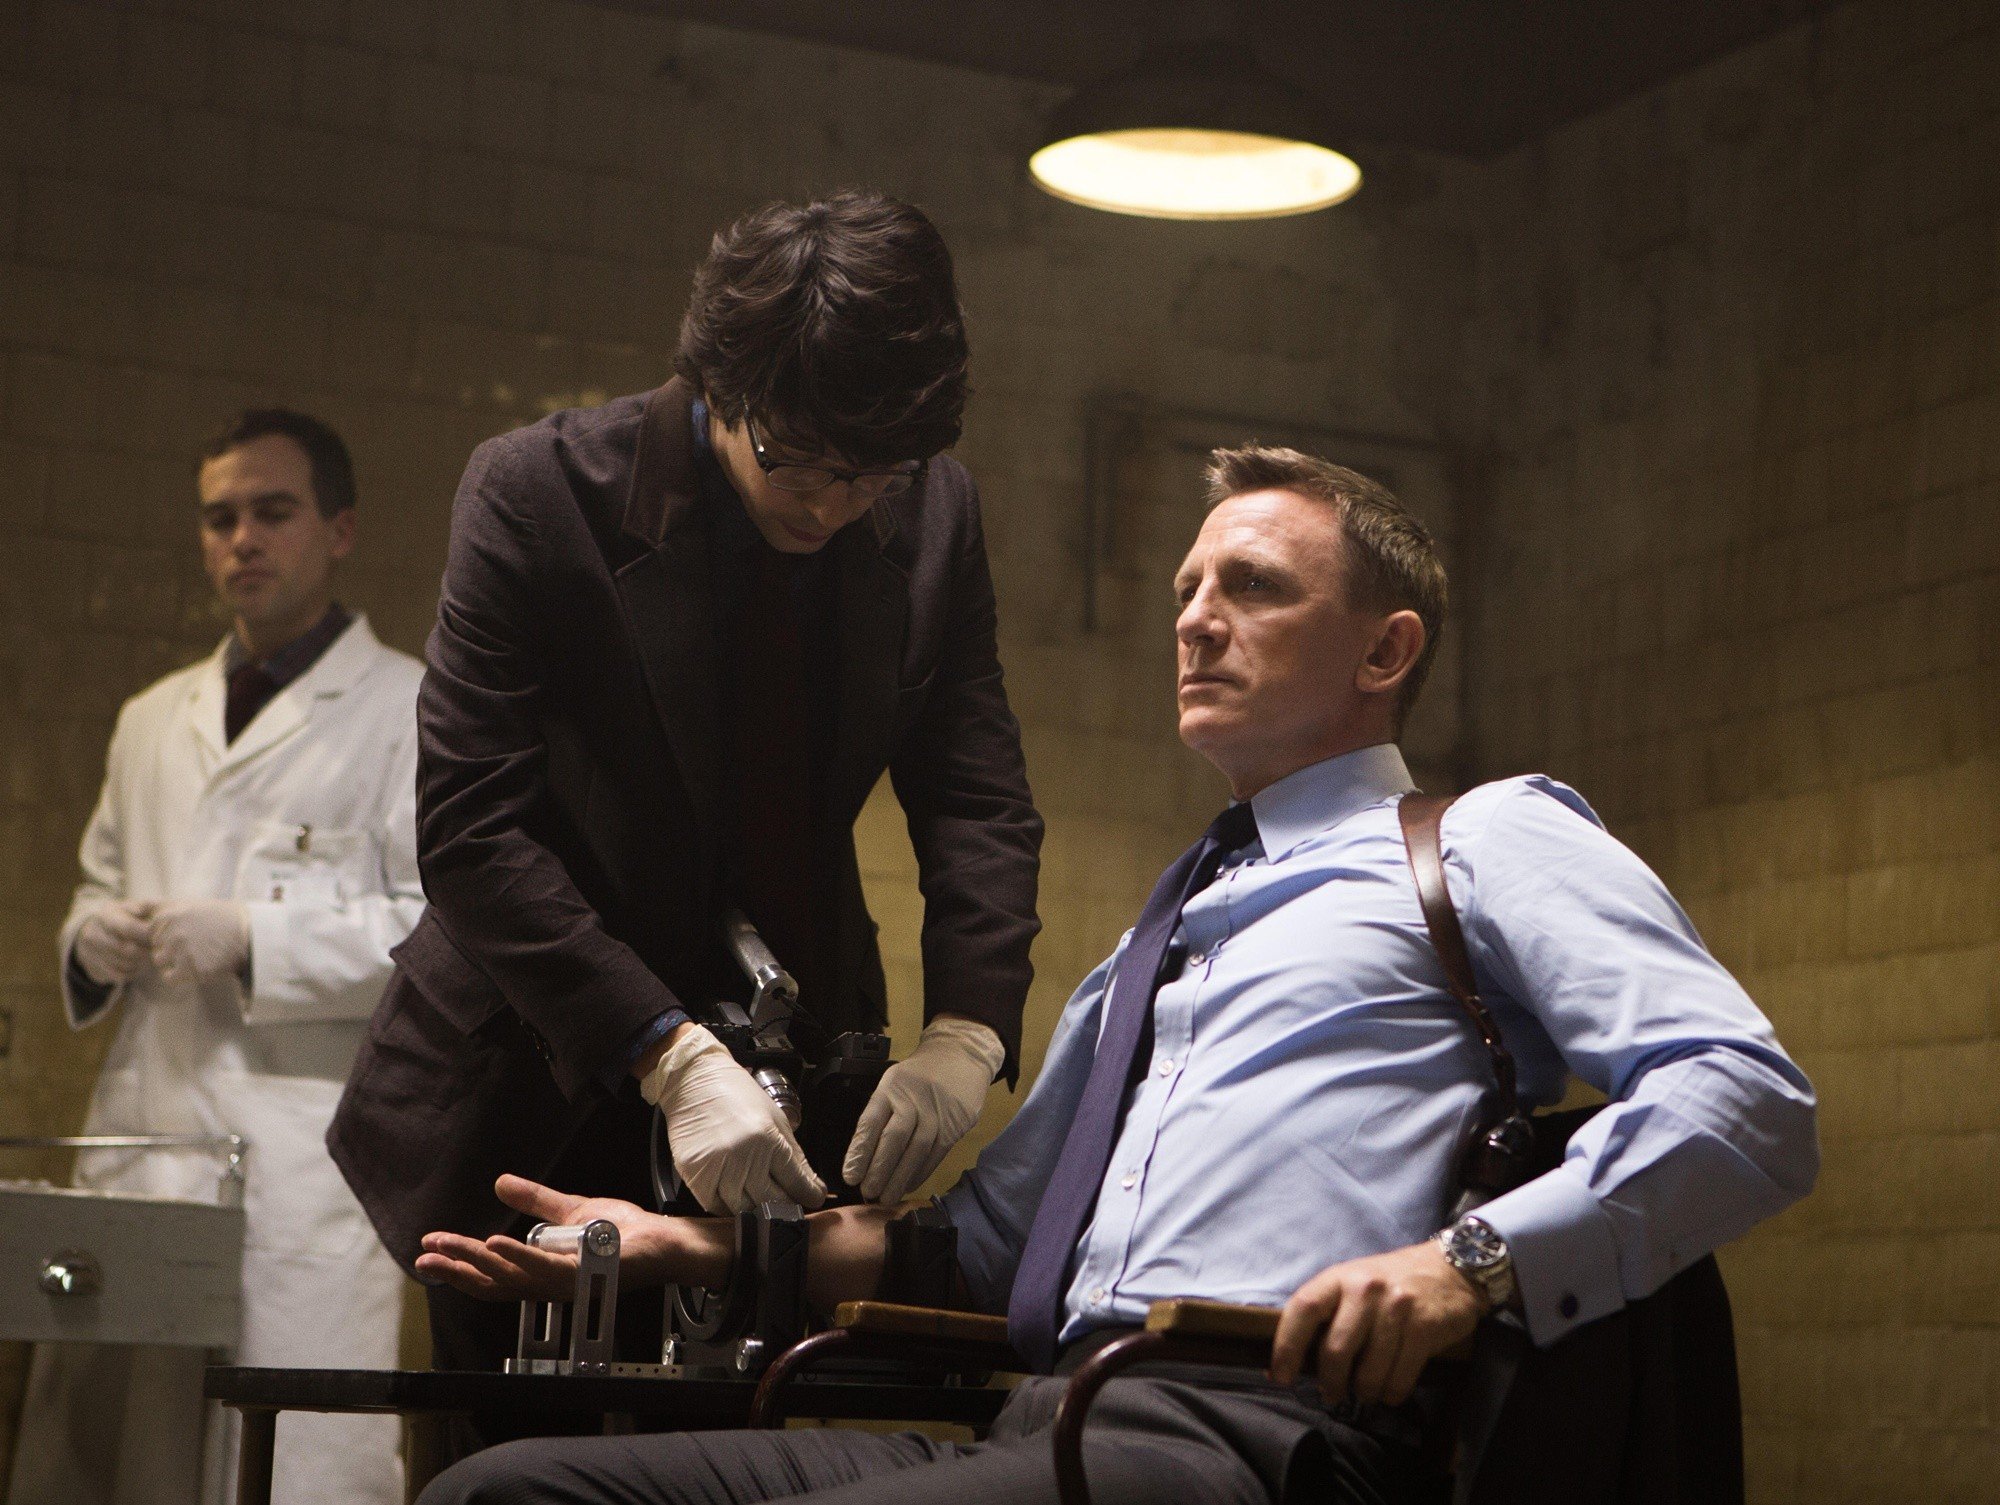 Ben Whishaw stars as Q and Daniel Craig stars as James Bond in Sony Pictures' Spectre (2015)